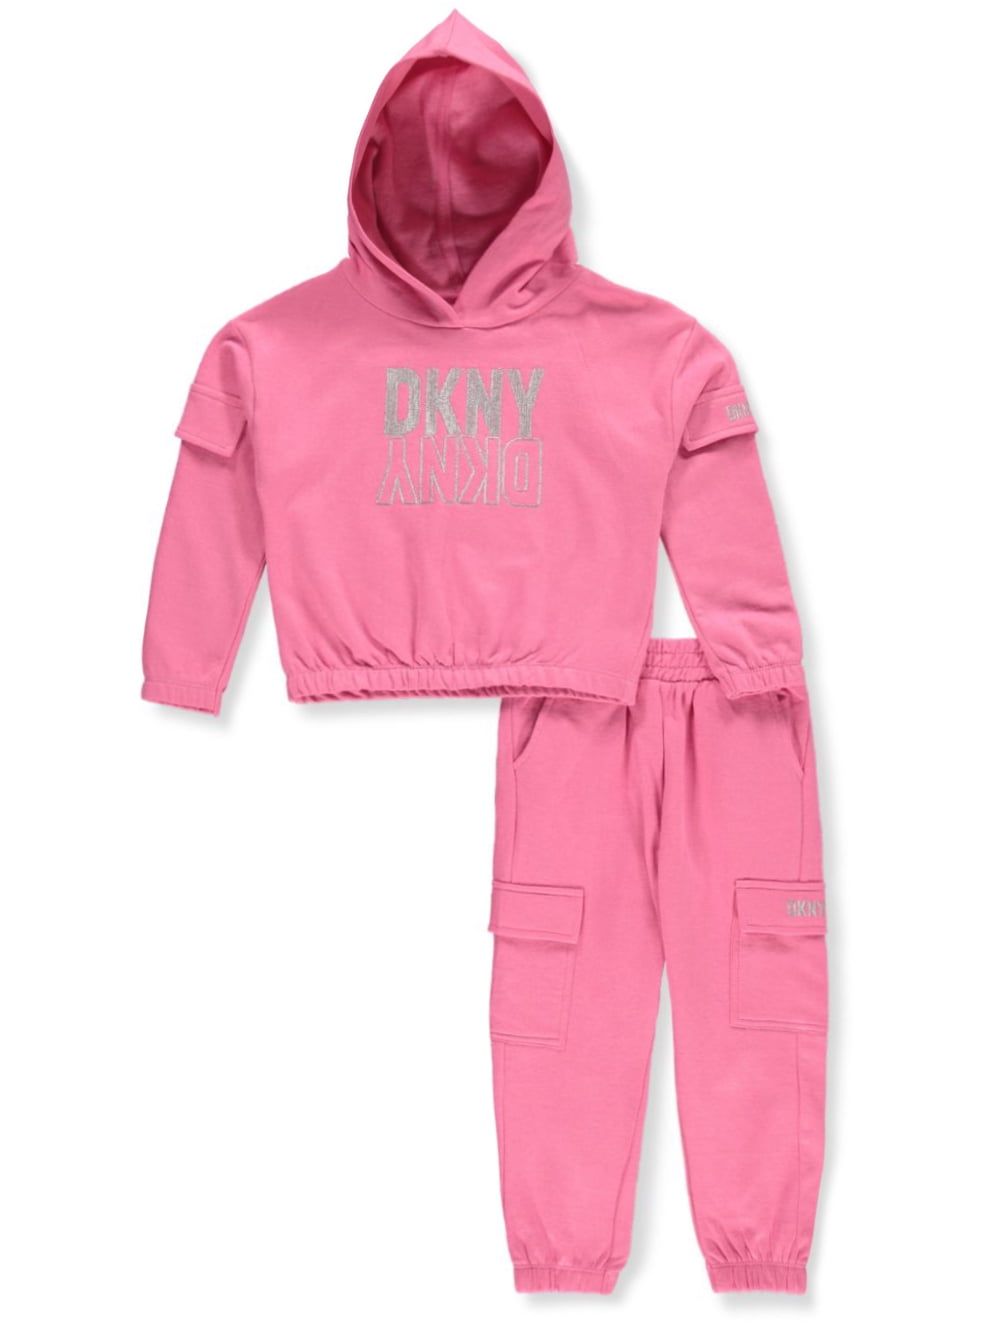  DKNY Girls' Jogger Set – 2 Piece Hoodie and Sweatpants